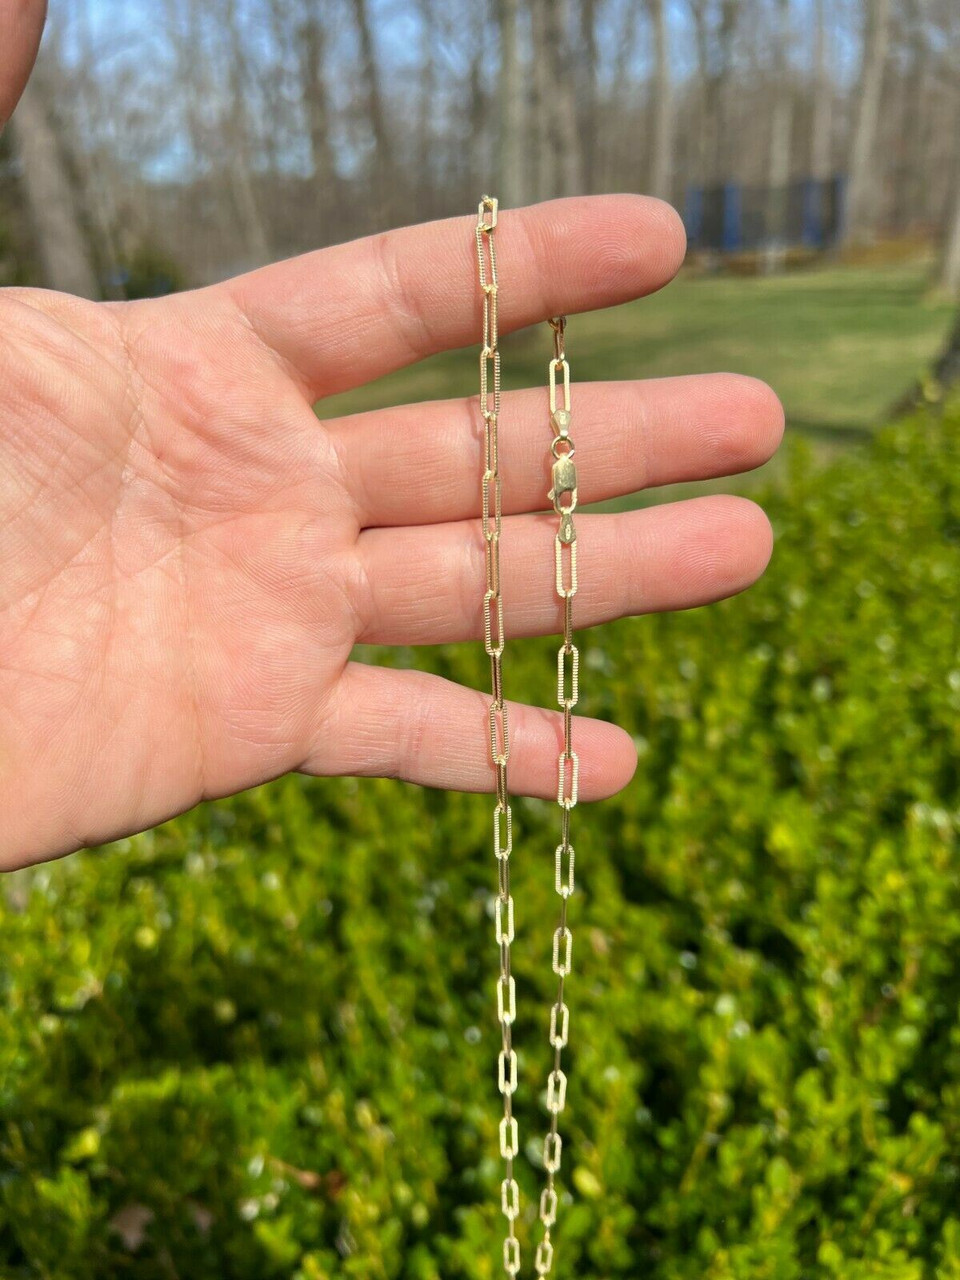 Mejuri 14K Yellow Gold Chain Necklaces: Paperclip Chain Charm Necklace